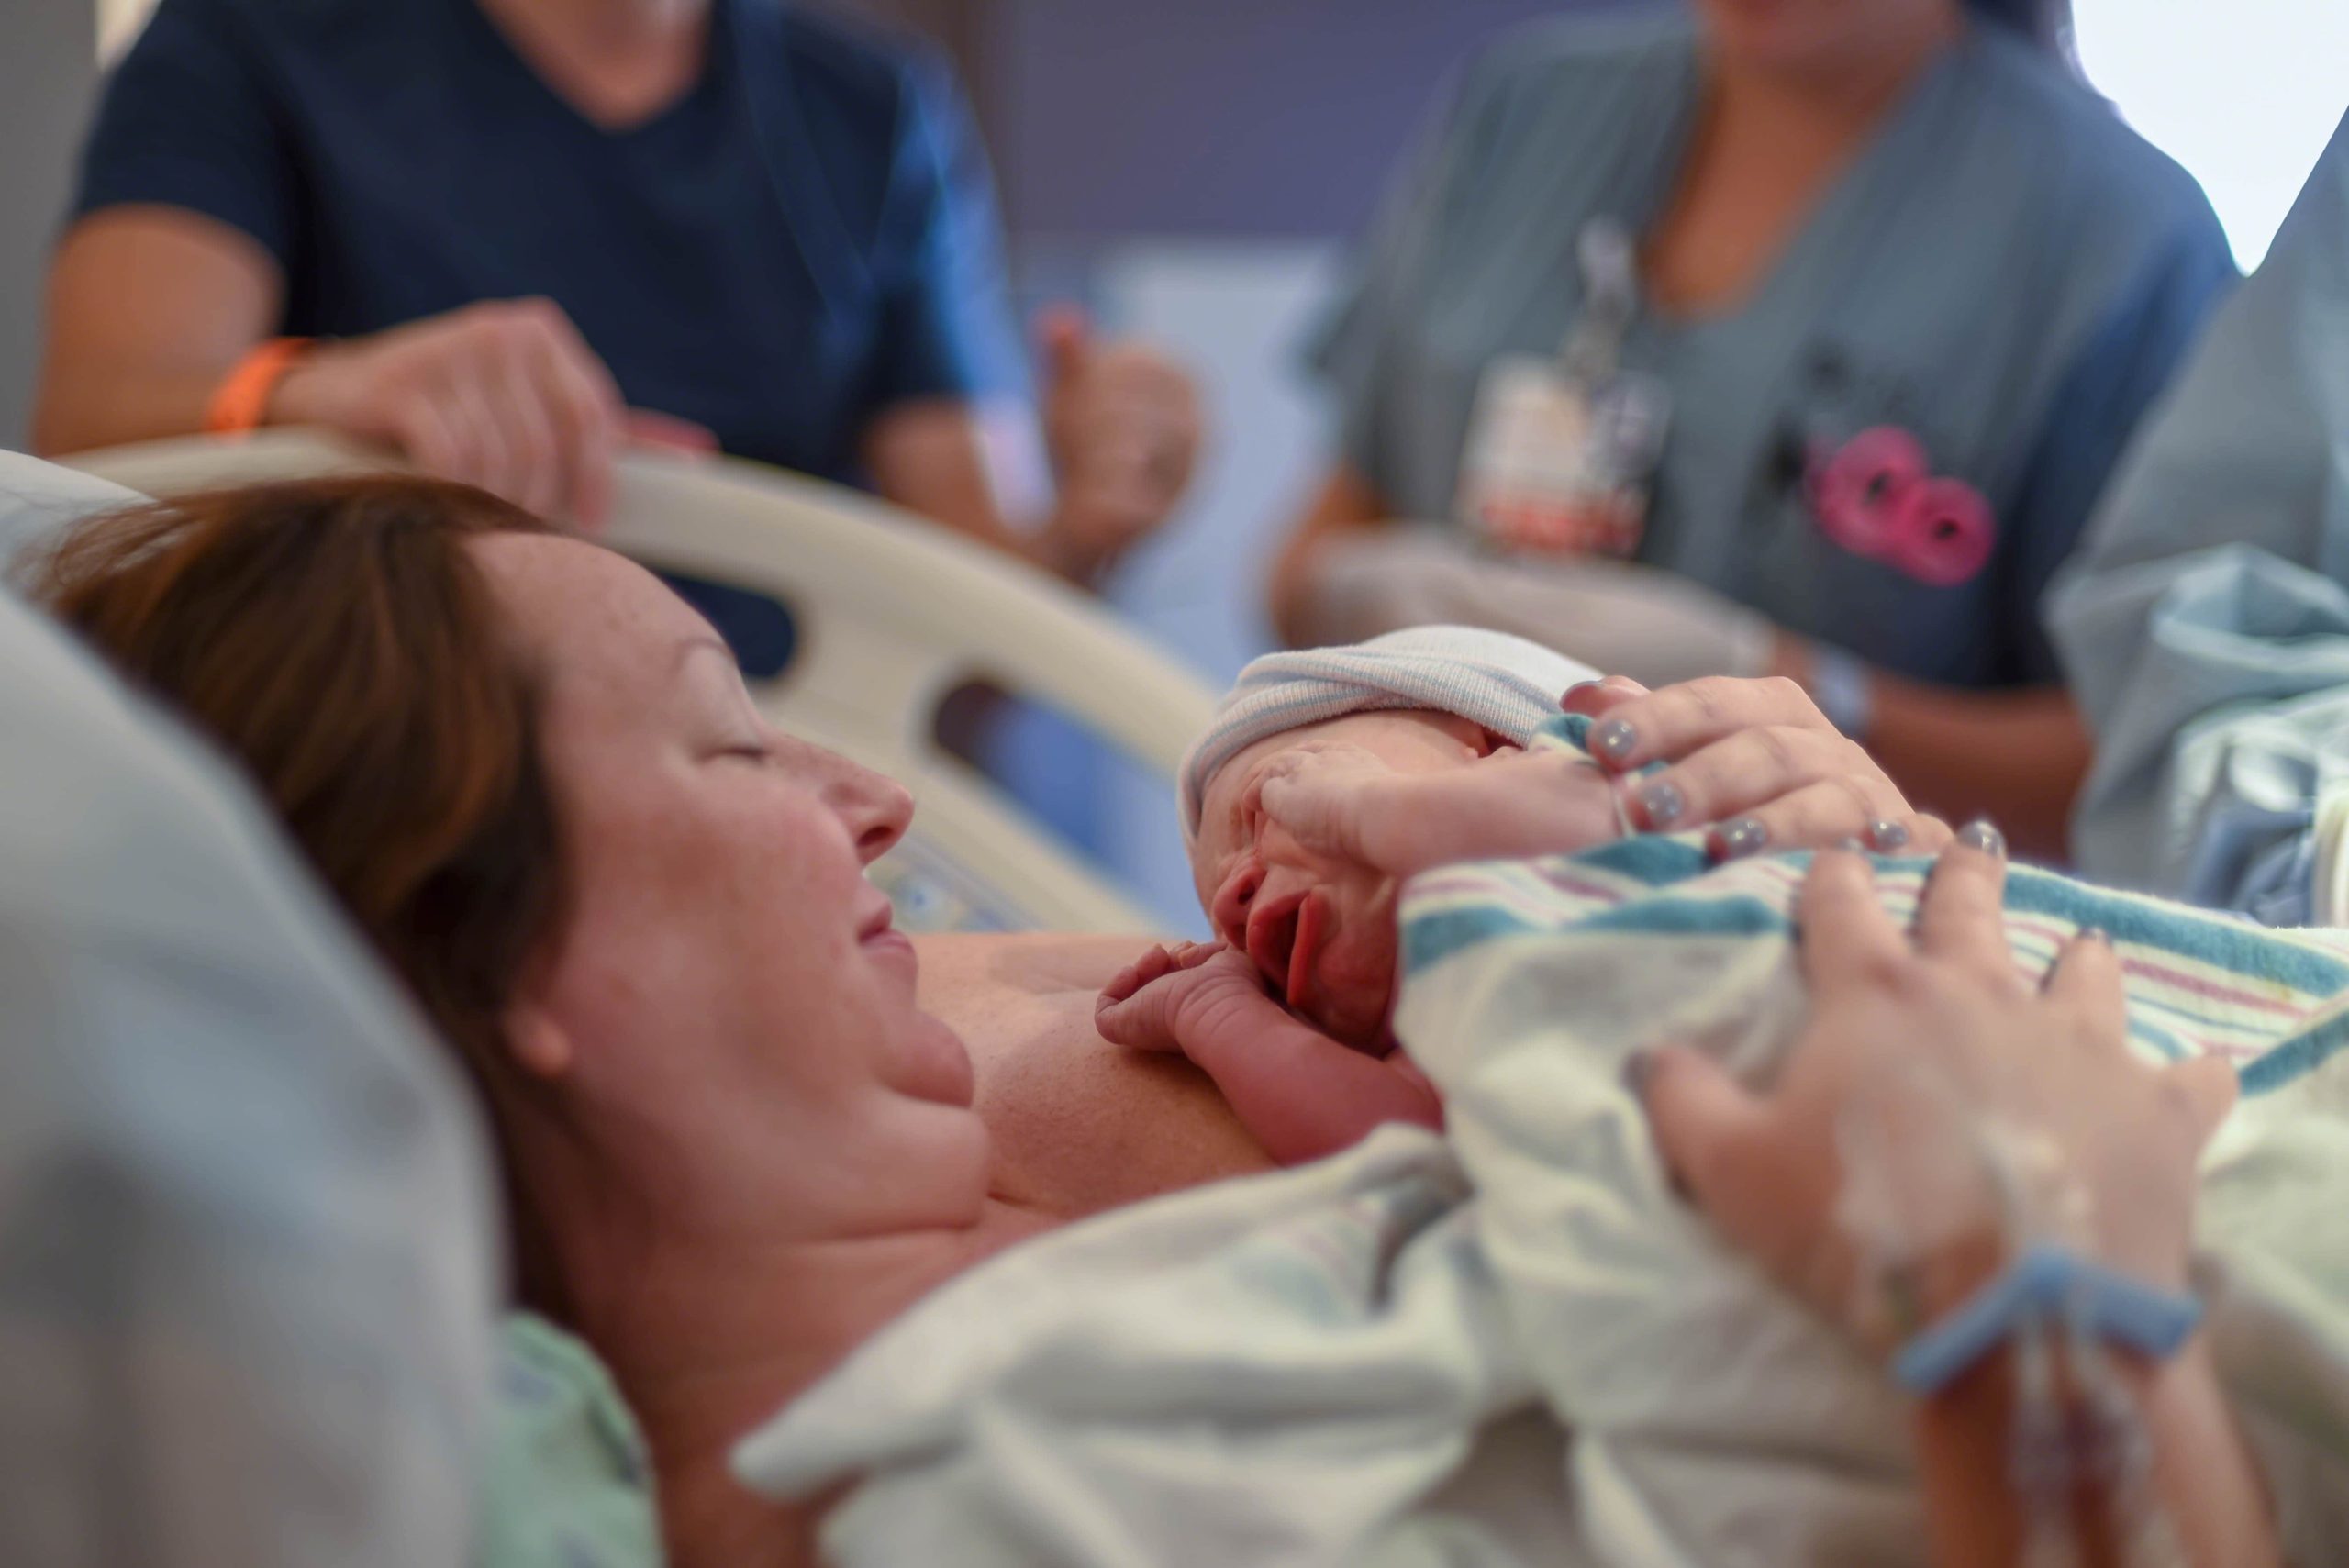 mother-and-newborn-in-delivery-room-at-hospital-2023-11-27-05-03-17-utc-min-scaled.jpg